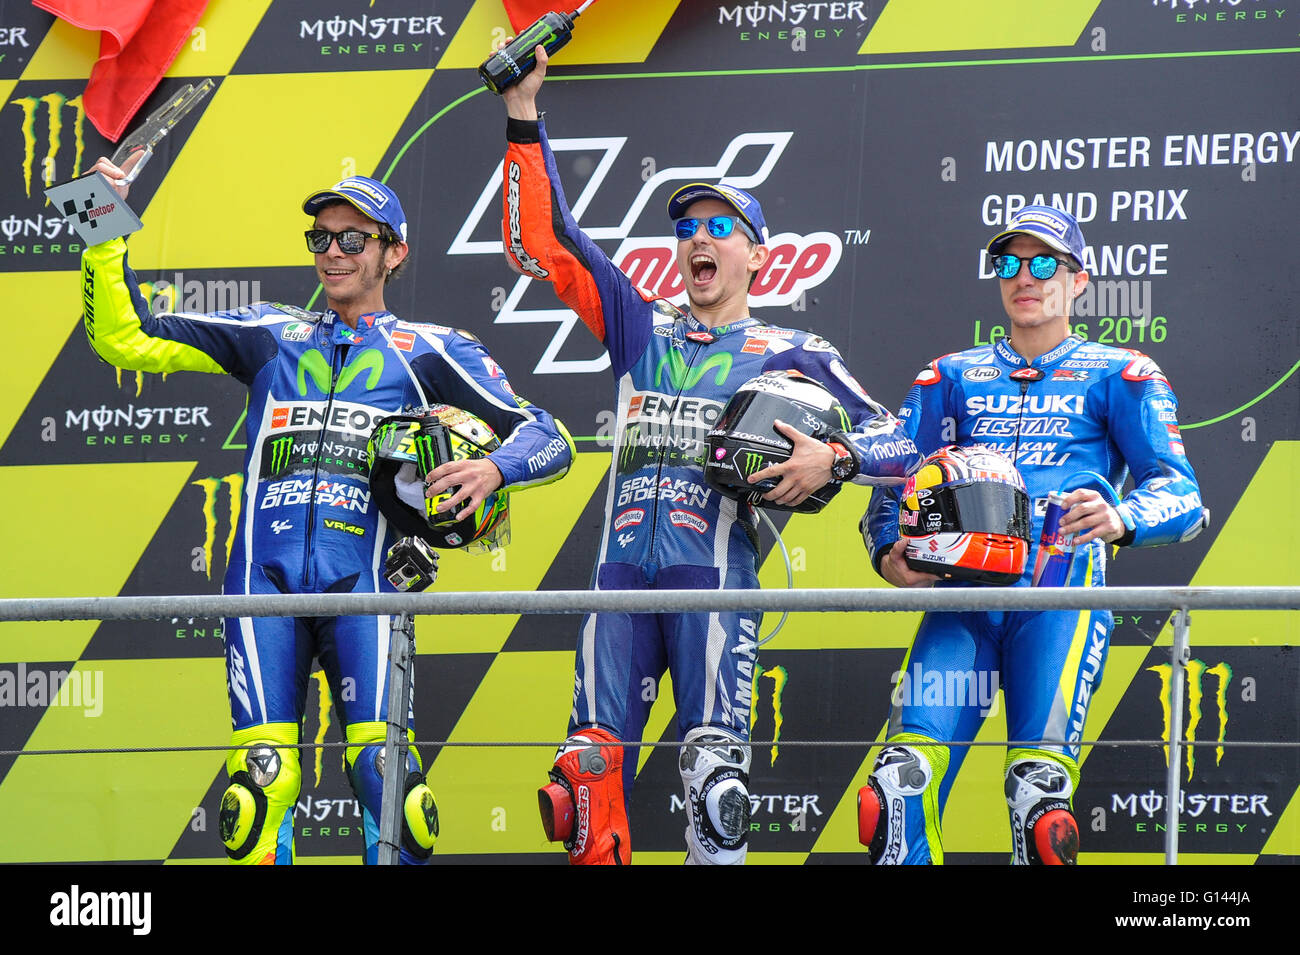 Le Mans Circuit, Le Mans, France. 08th May, 2016. MotoGP Monster Energy Grand  Prix de France Race Day. Podium between 1, 2 and 3rd place winners Jorge  Lorenzo, Valentino Rossi, Maverick Vinales.